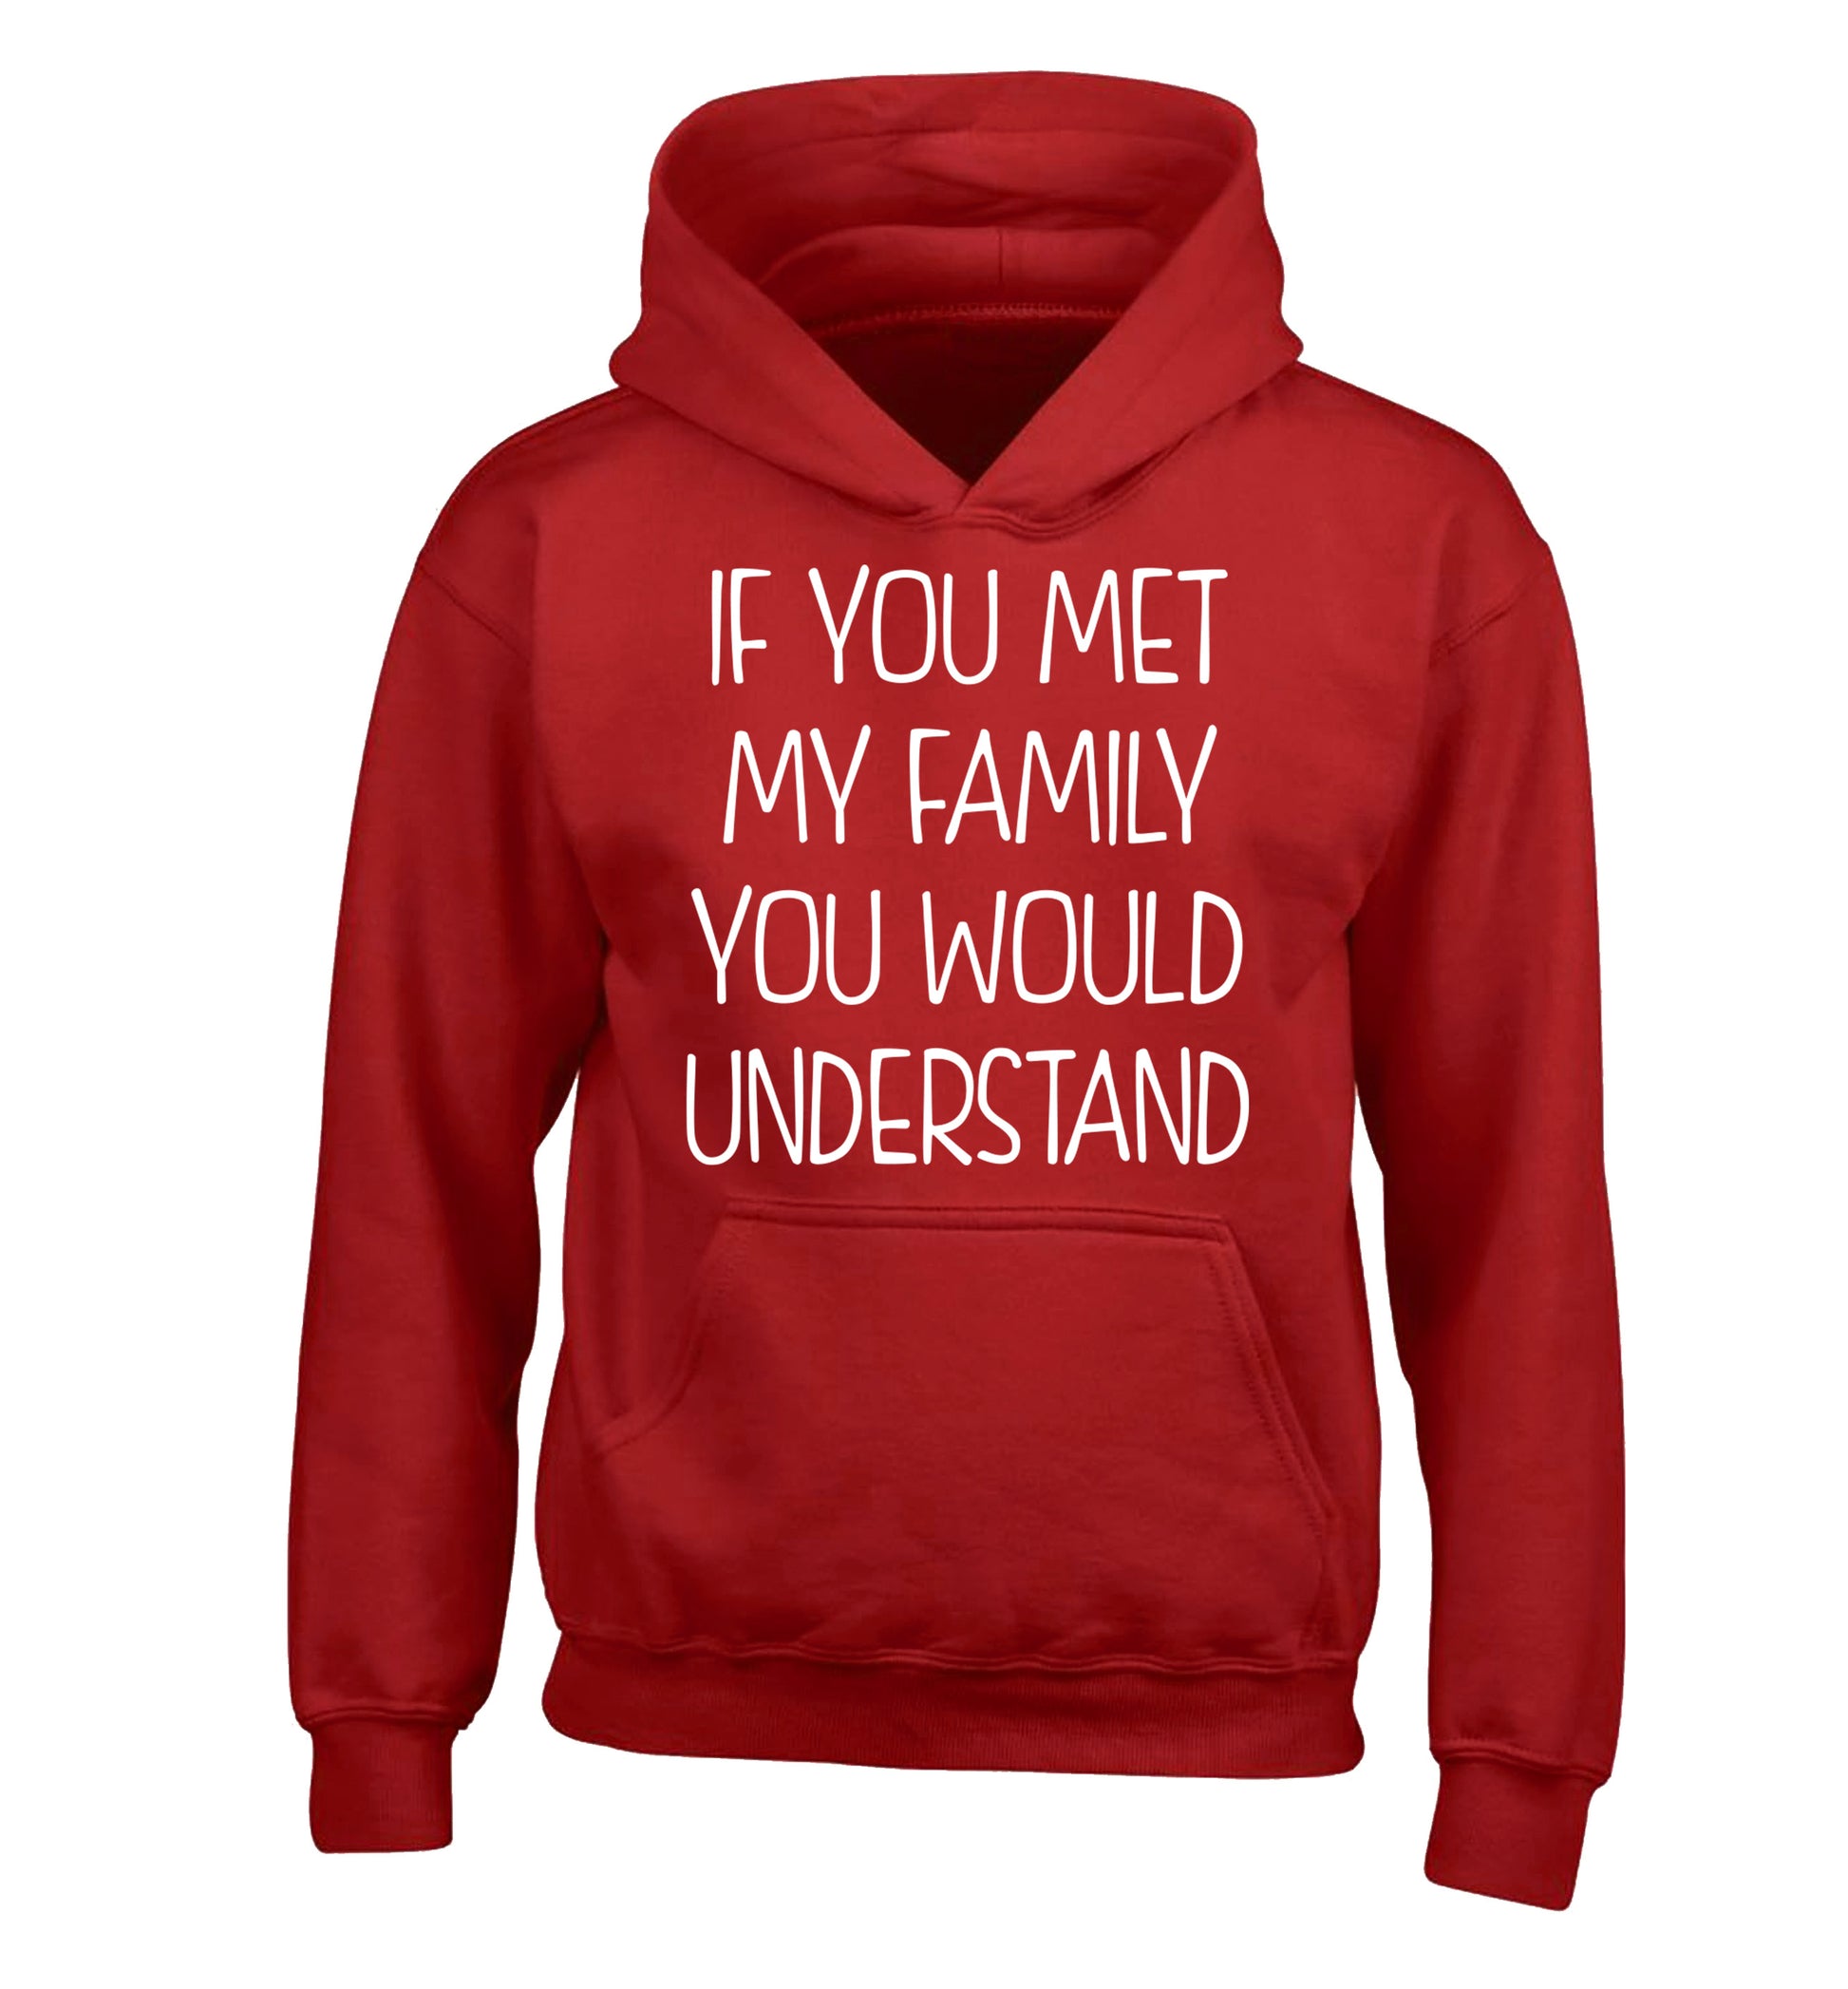 If you met my family you would understand children's red hoodie 12-13 Years